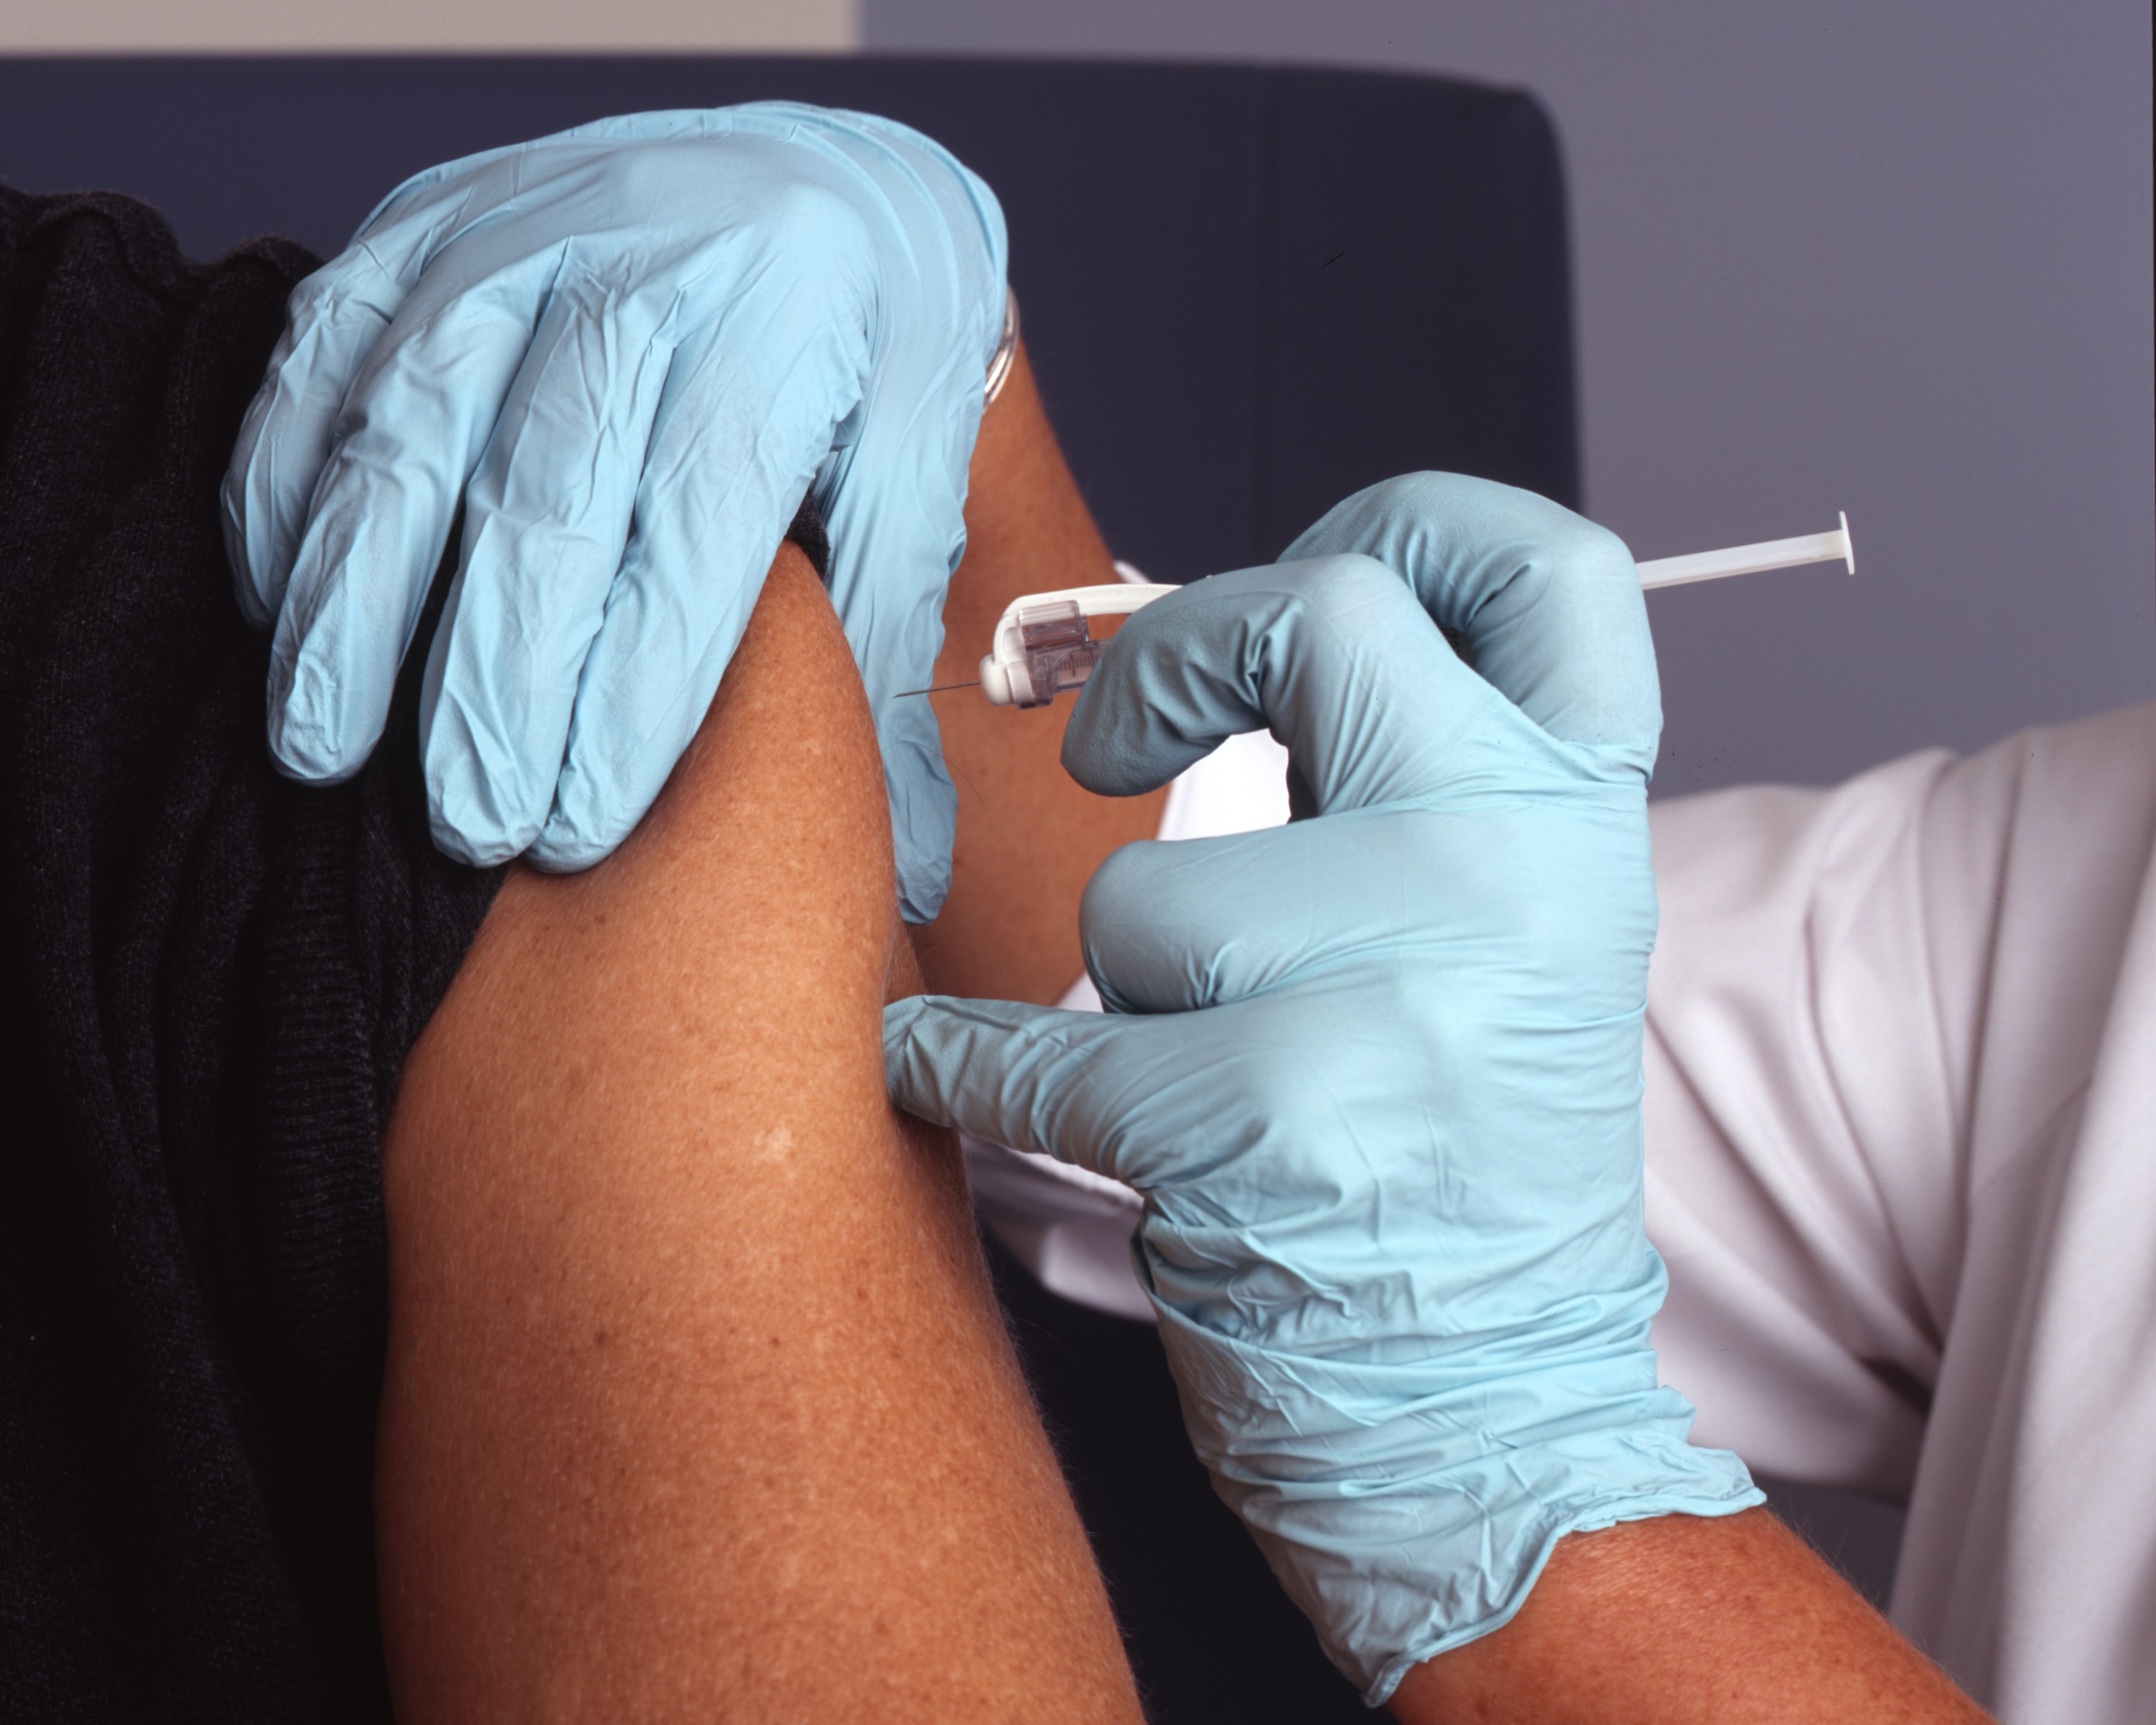 Abu Dhabi has approved the use of Pfizer-BioNTech vaccines.